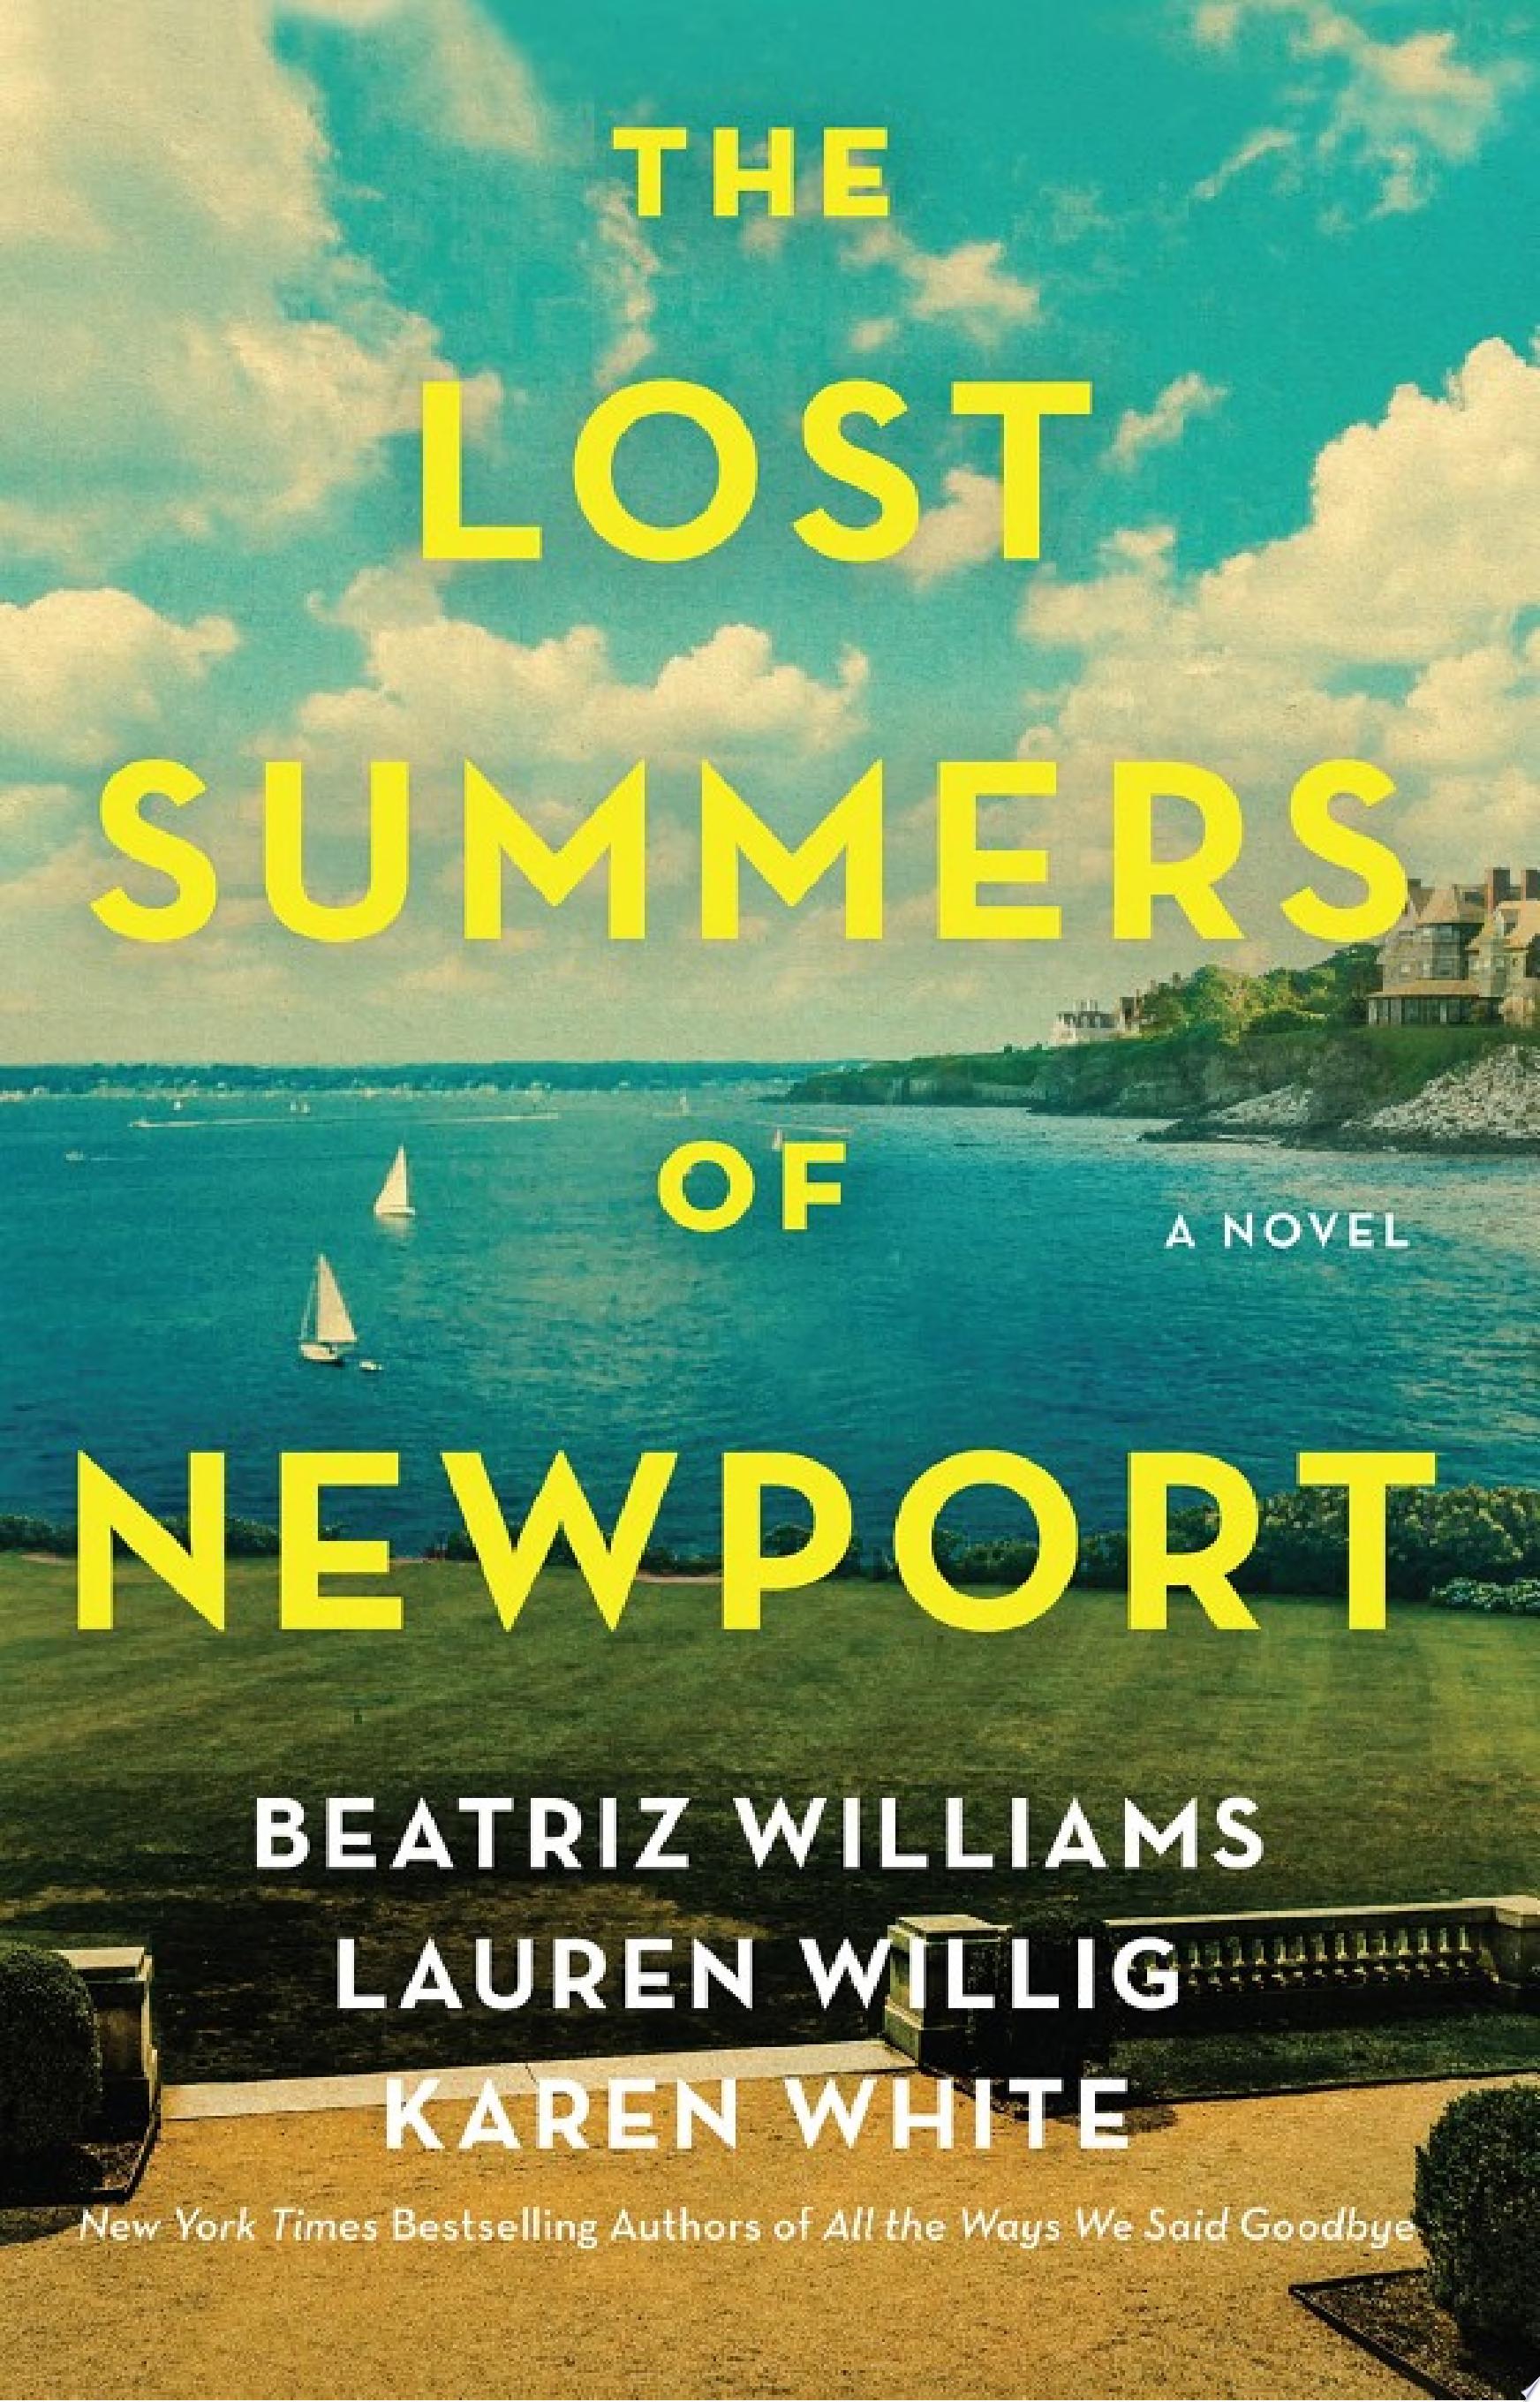 Image for "The Lost Summers of Newport"